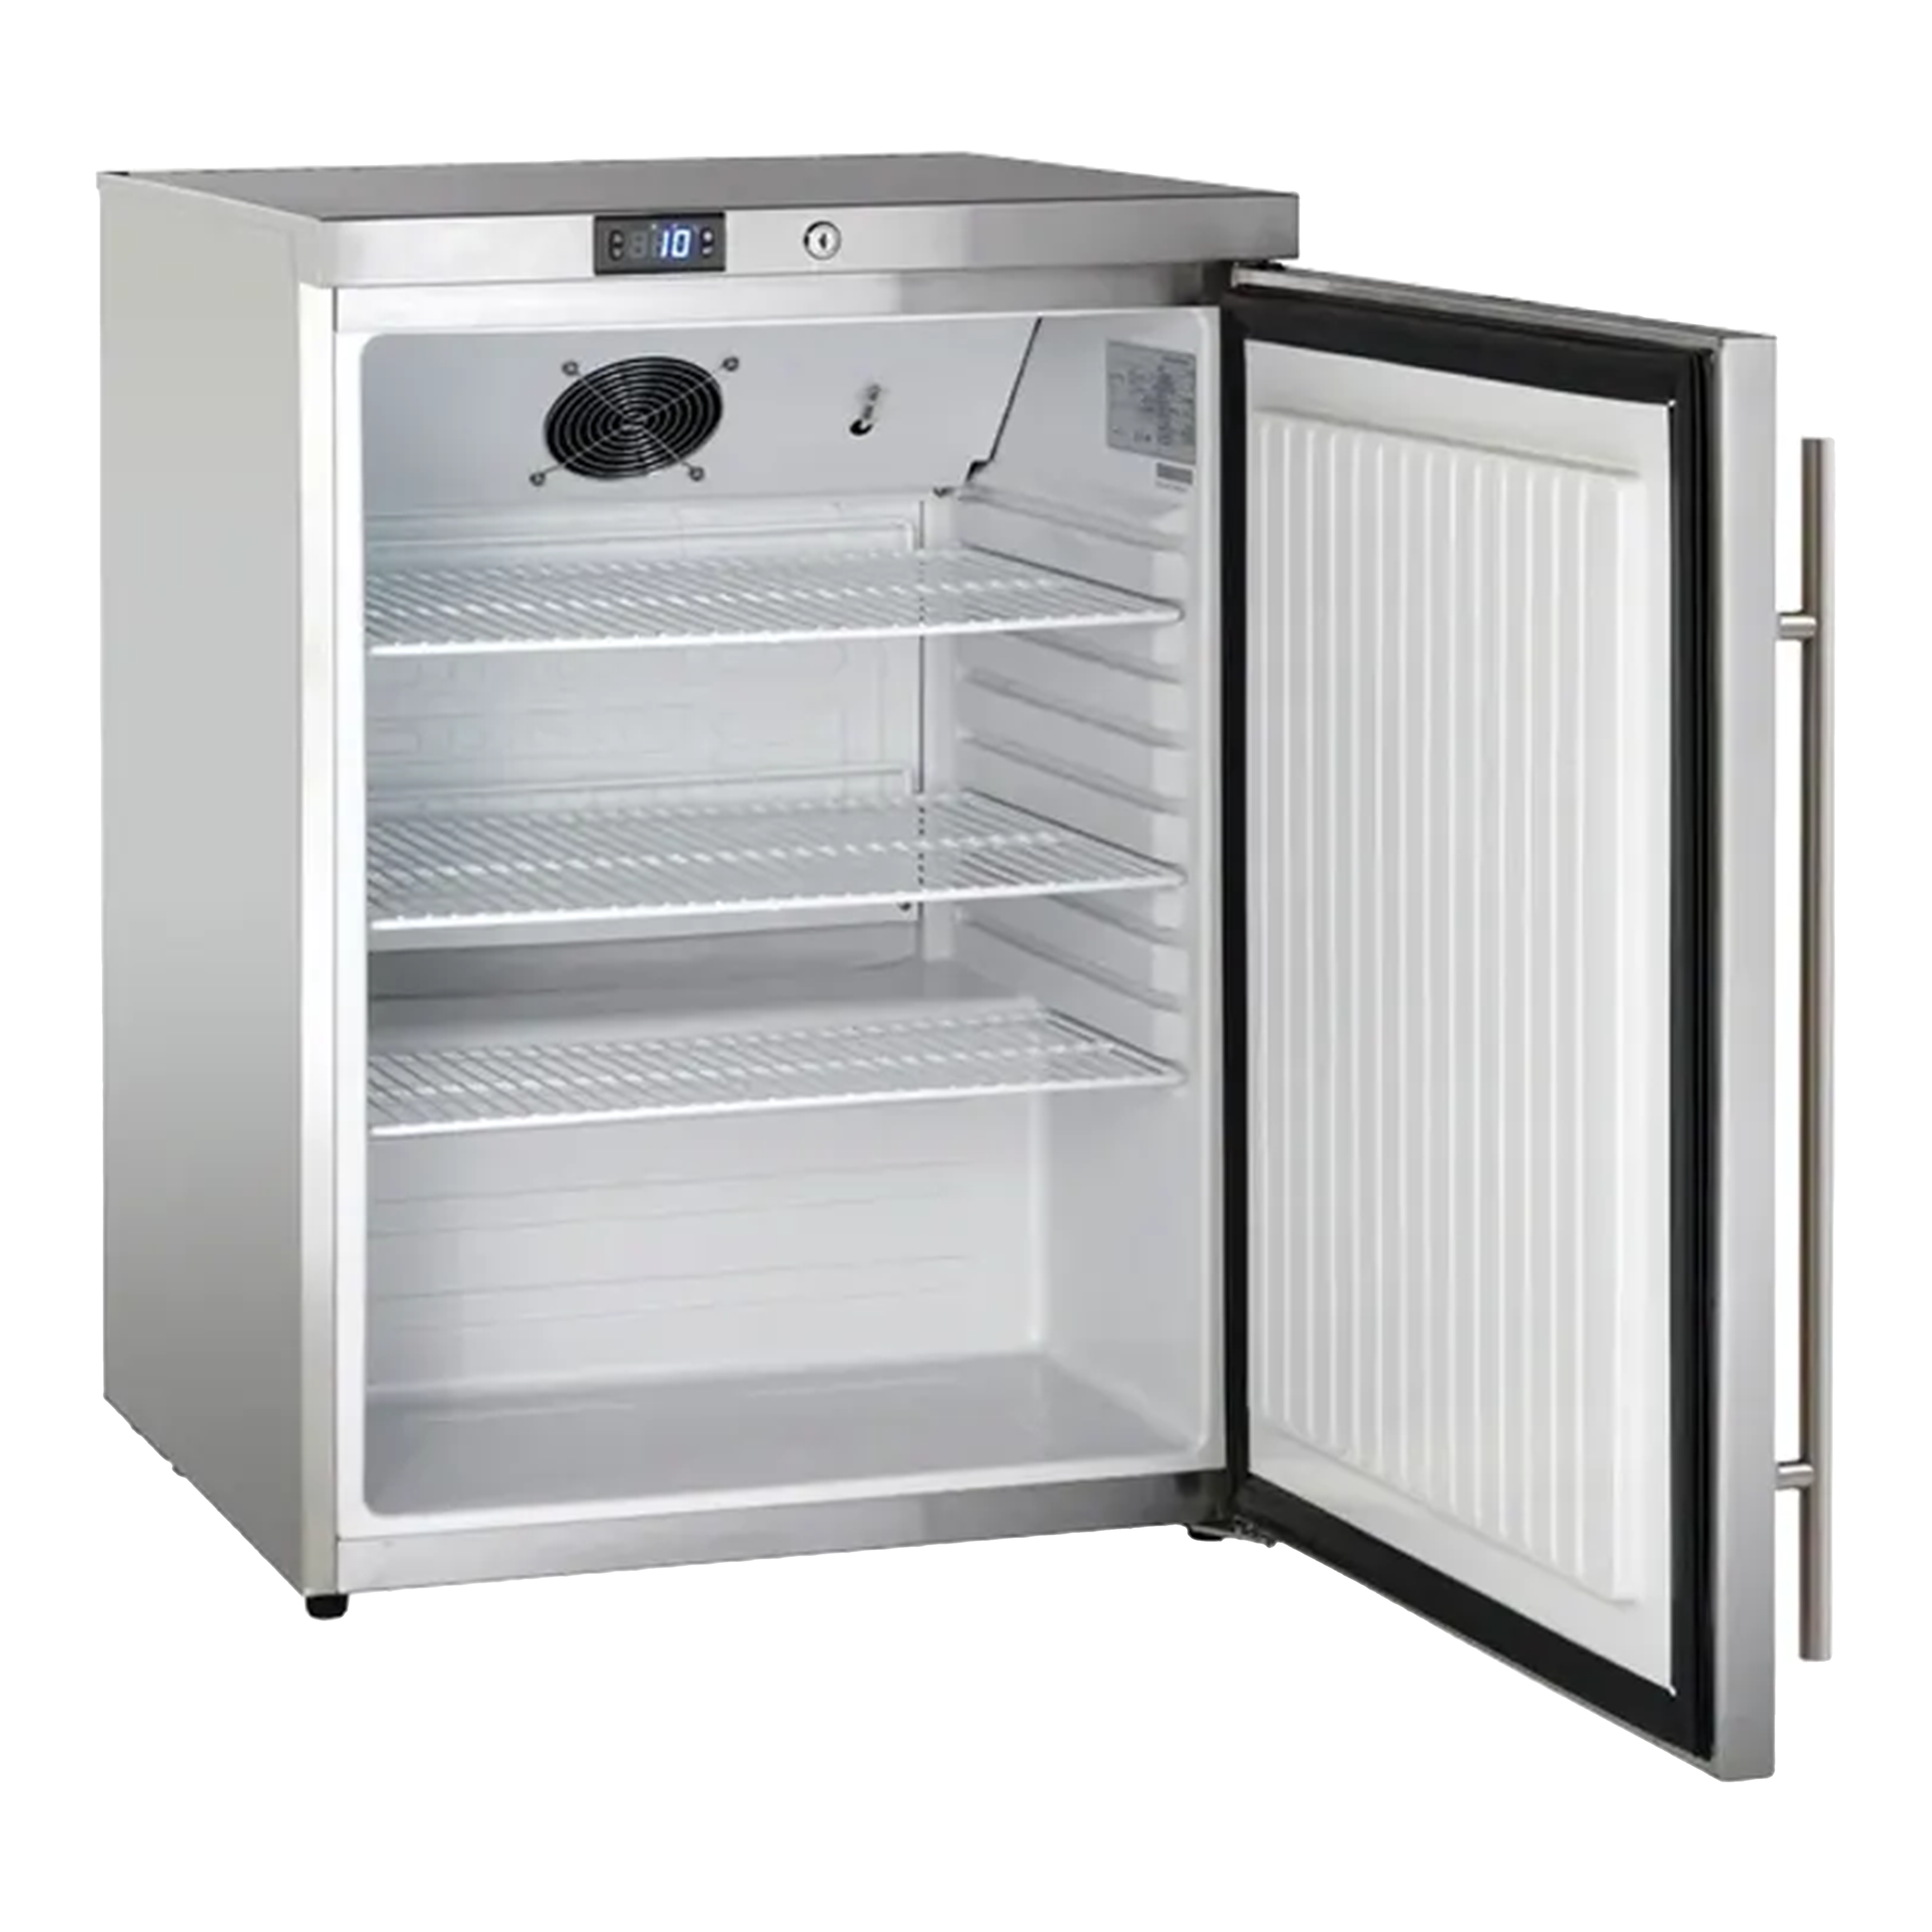 Side view of a 5.4 Cu Ft Stainless Steel Undercounter Outdoor Refrigerator with the door open, revealing three wire shelves inside. A digital thermostat is featured above the door, outside the fridge